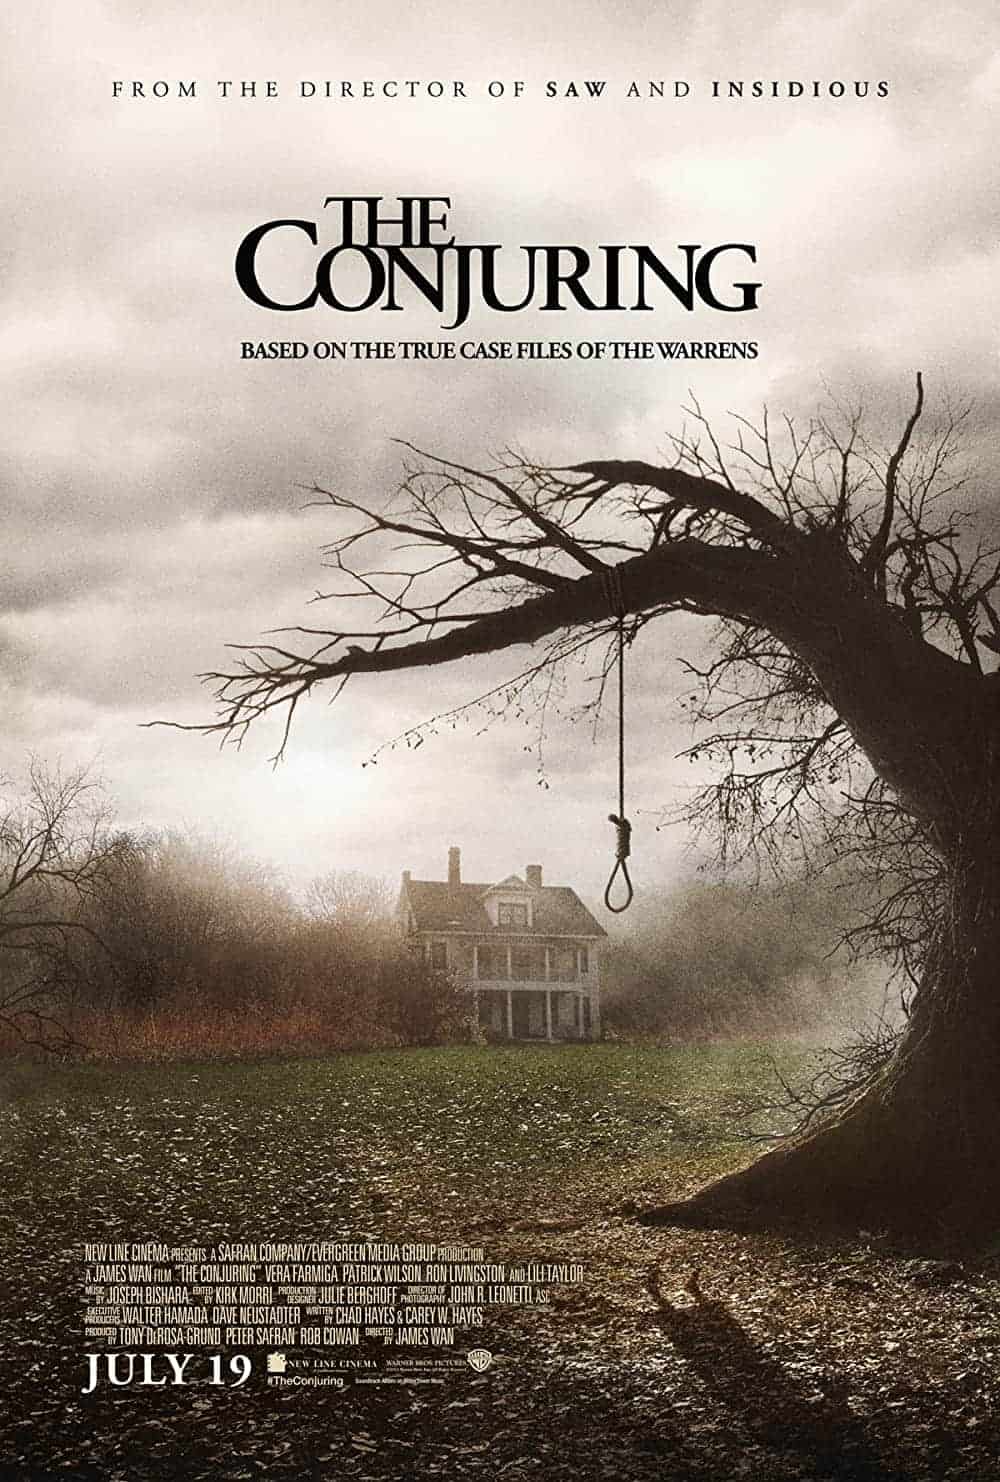 The Conjuring (2013) Best Exorcism Movies You Can't Miss